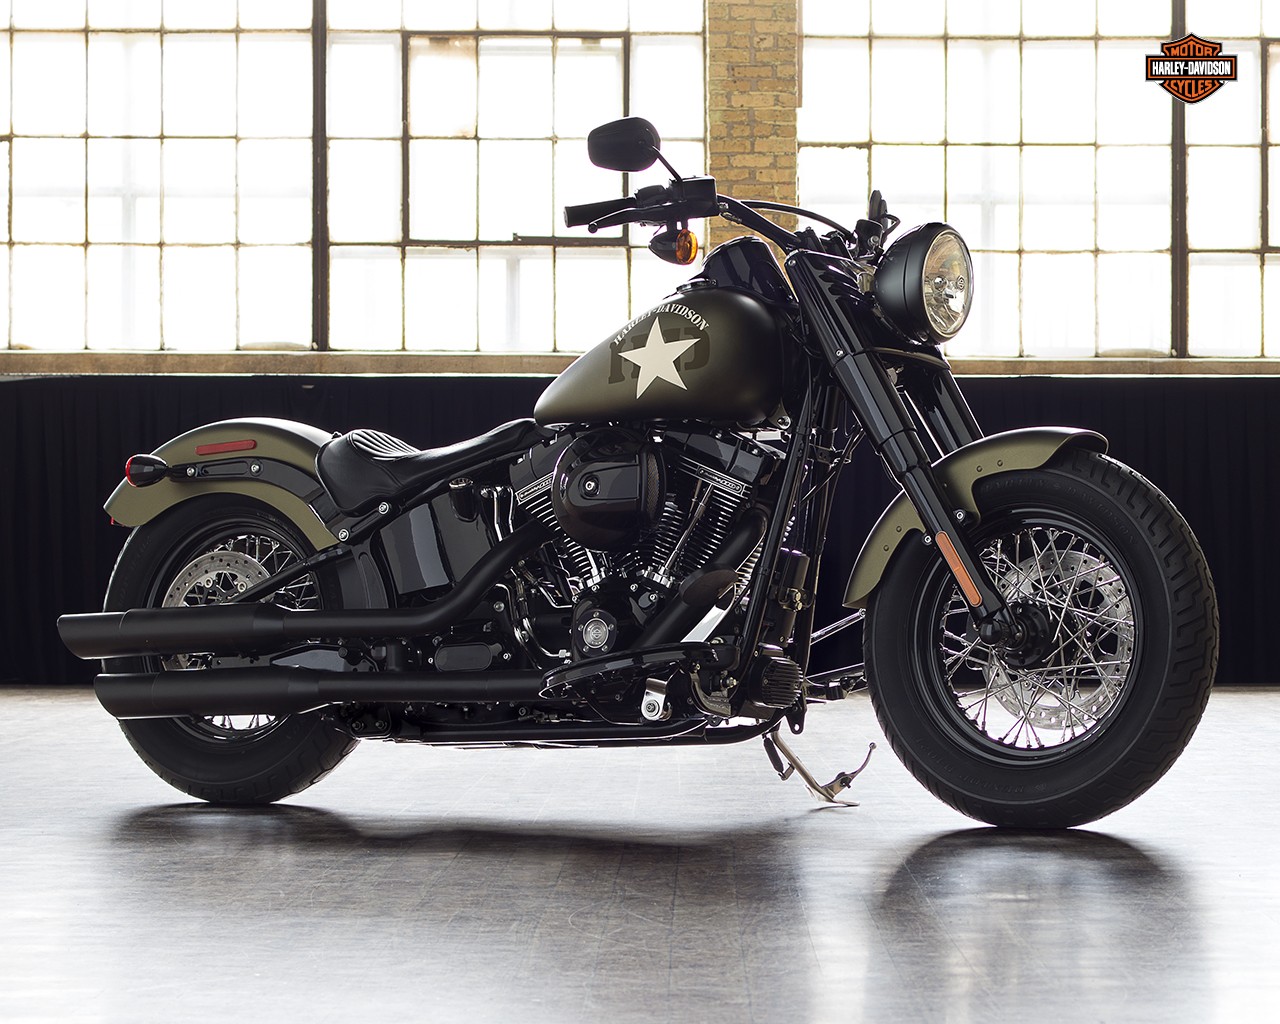 https://s1.cdn.autoevolution.com/images/news/2016-harley-davidson-softail-slim-s-shows-authentic-retro-military-styling-photo-gallery-99437_1.jpg